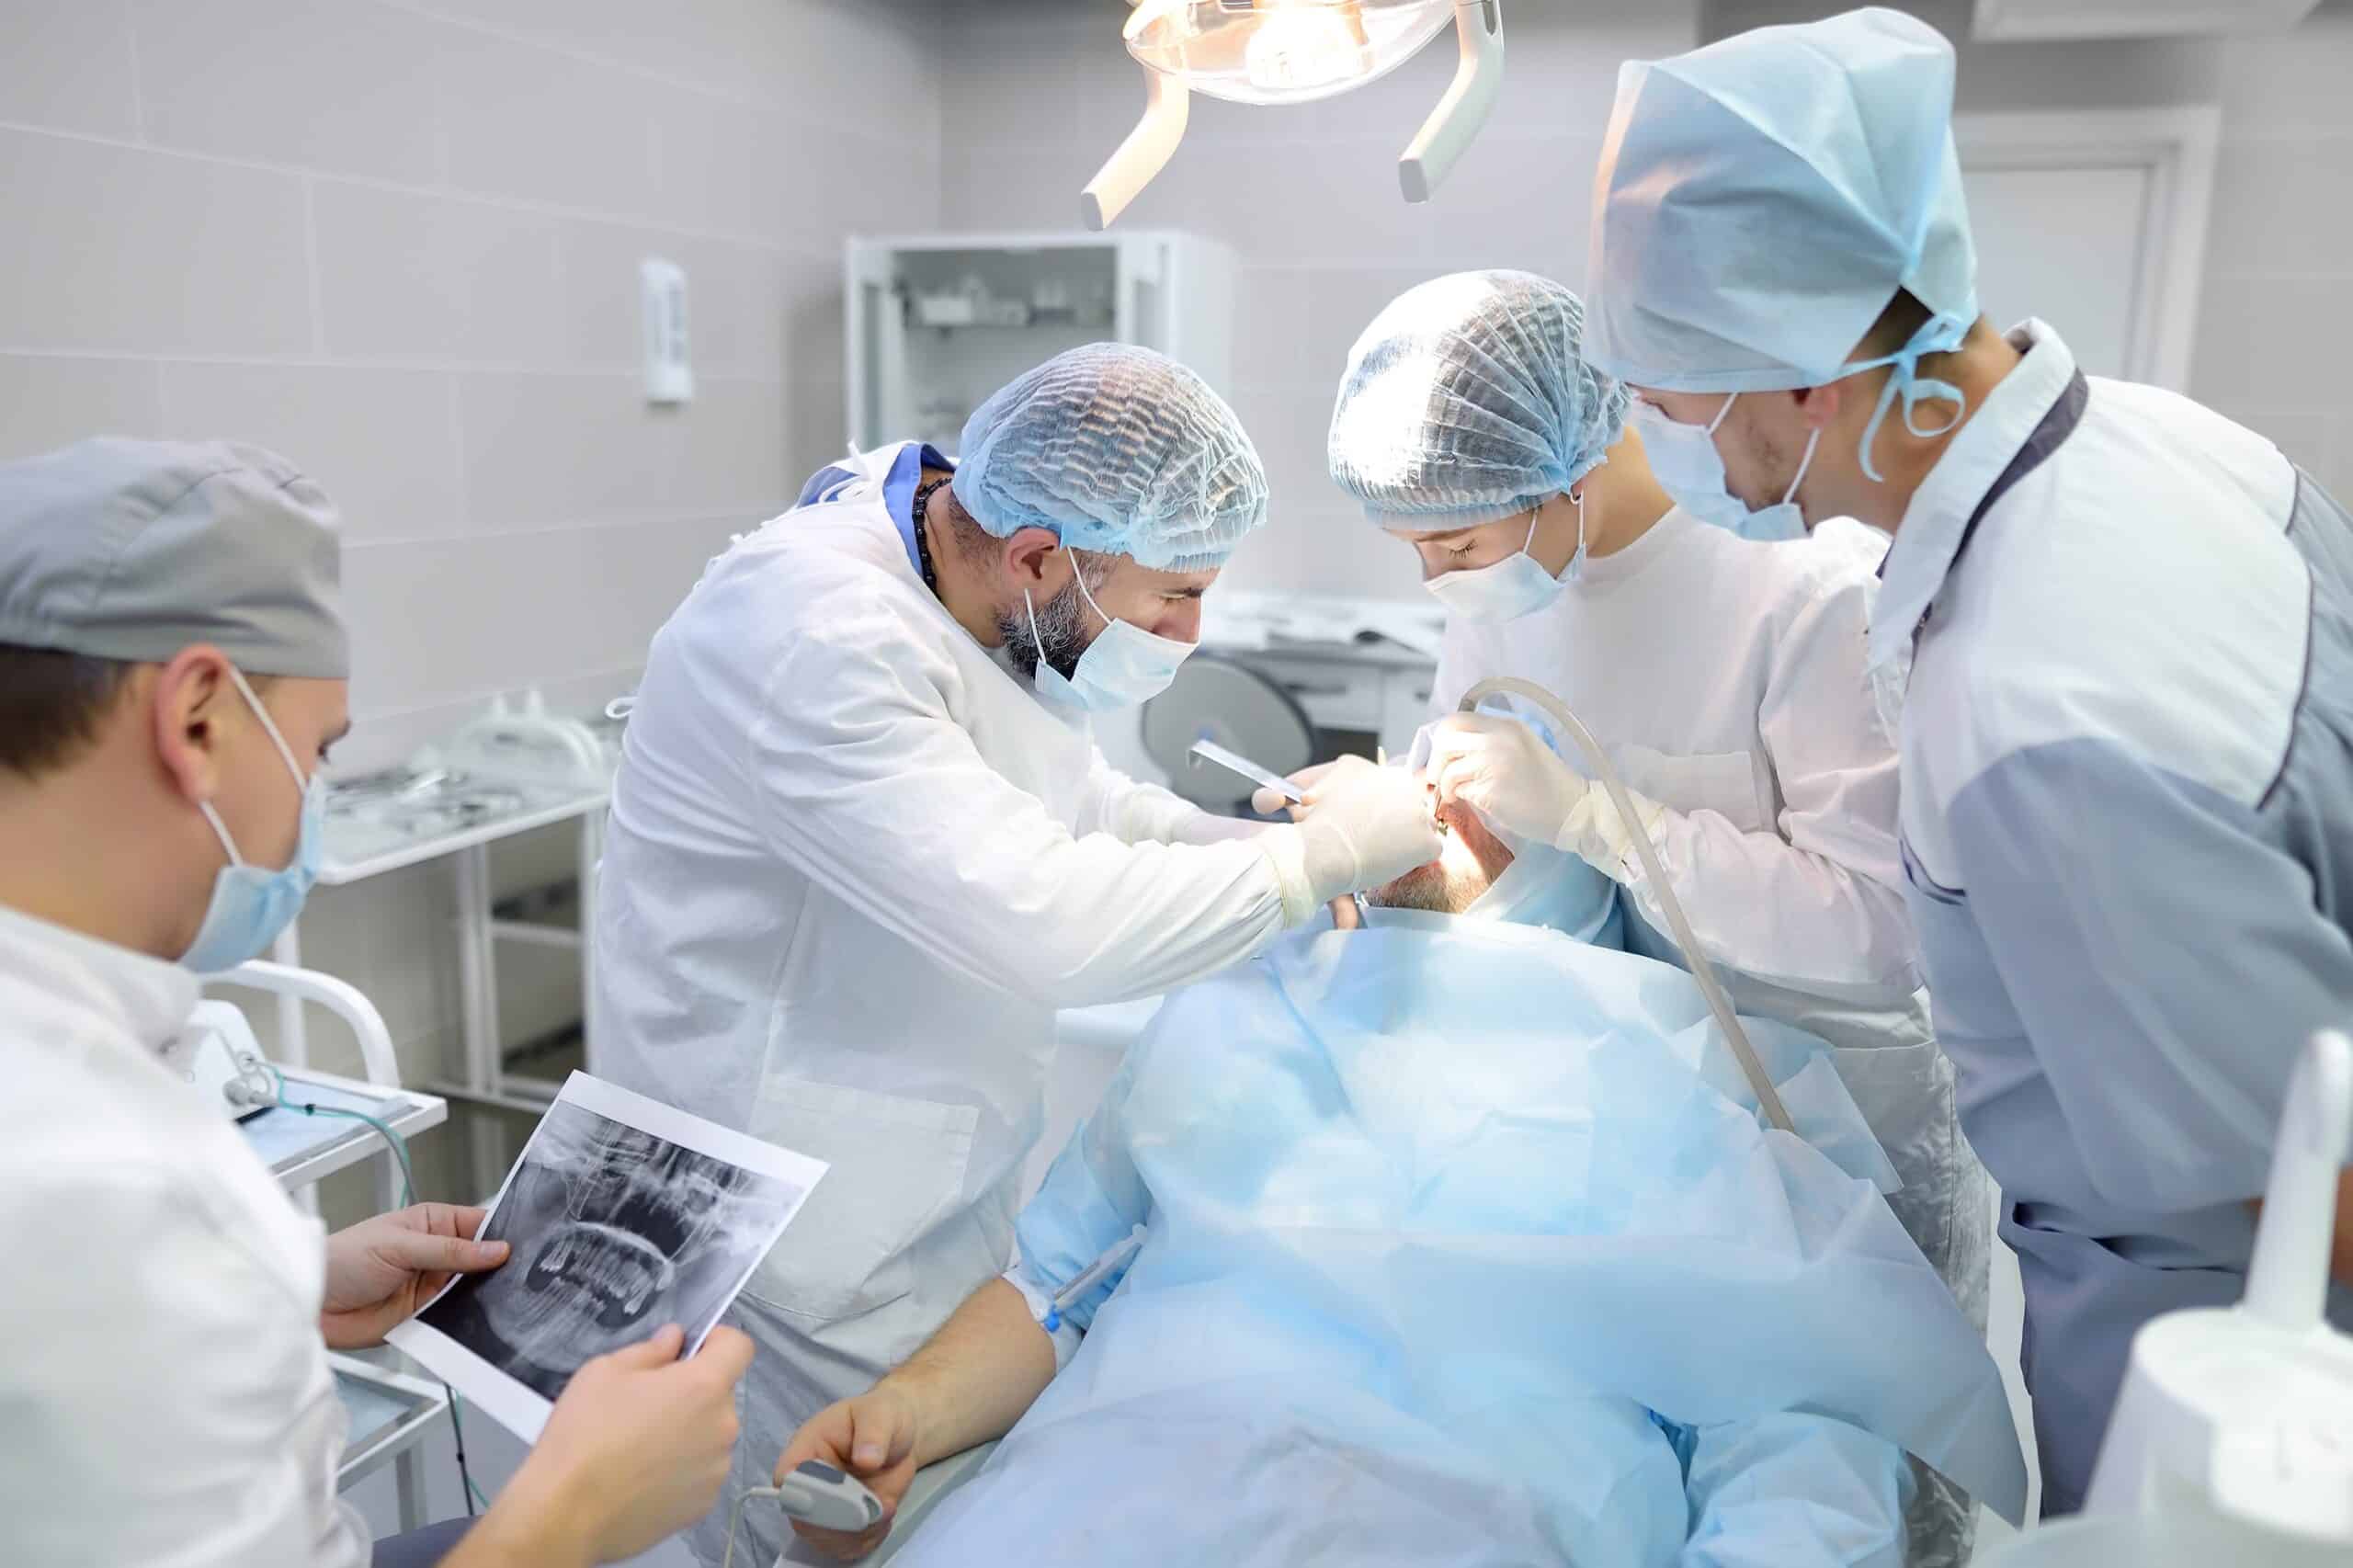 Anesthetized patient in the operating room